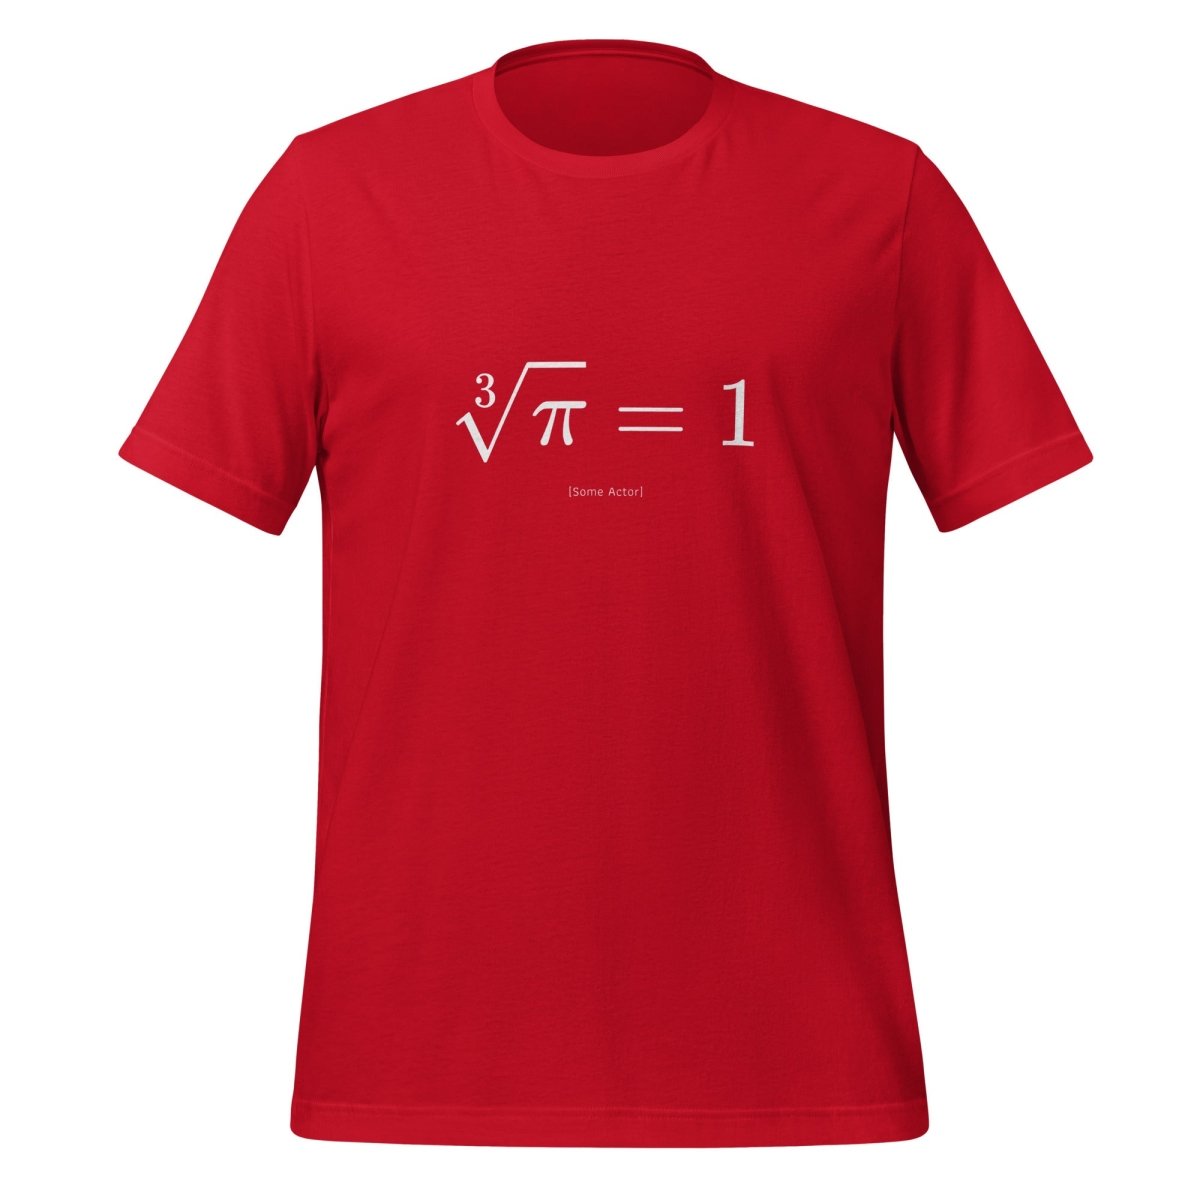 The Cube Root of Pi Equals 1 T - Shirt (unisex) - Red - AI Store